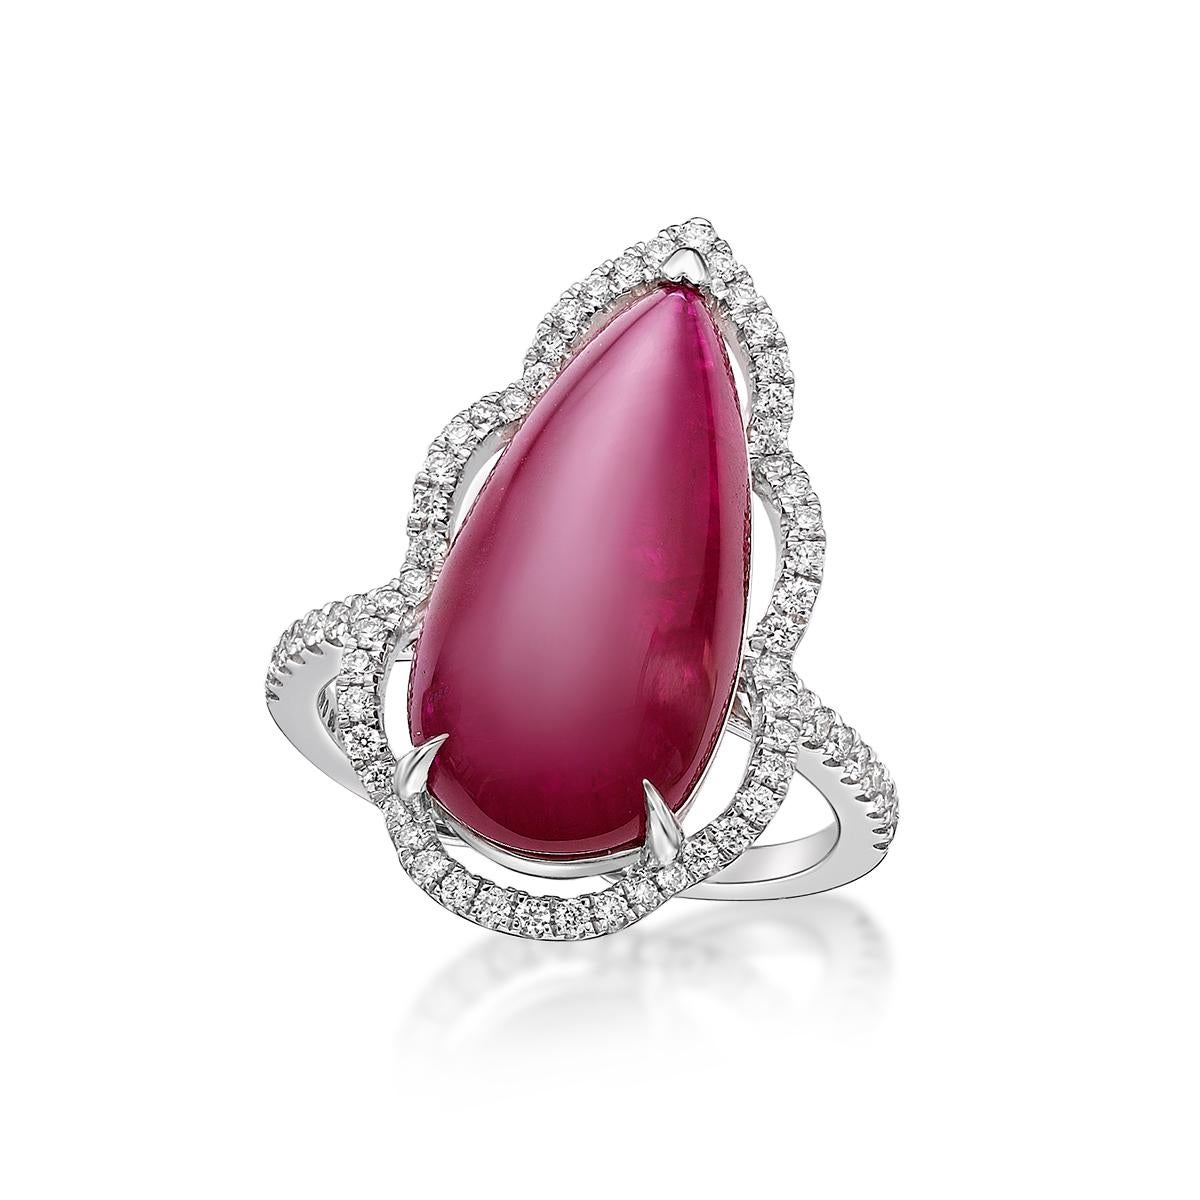 Red is the color of life, bright and fiery like the blood that flows through our veins, with an intensity that matches our most profound emotions - love, anger, passion, fury. Considered a stone of nobility, ruby is one of the most magnificent of